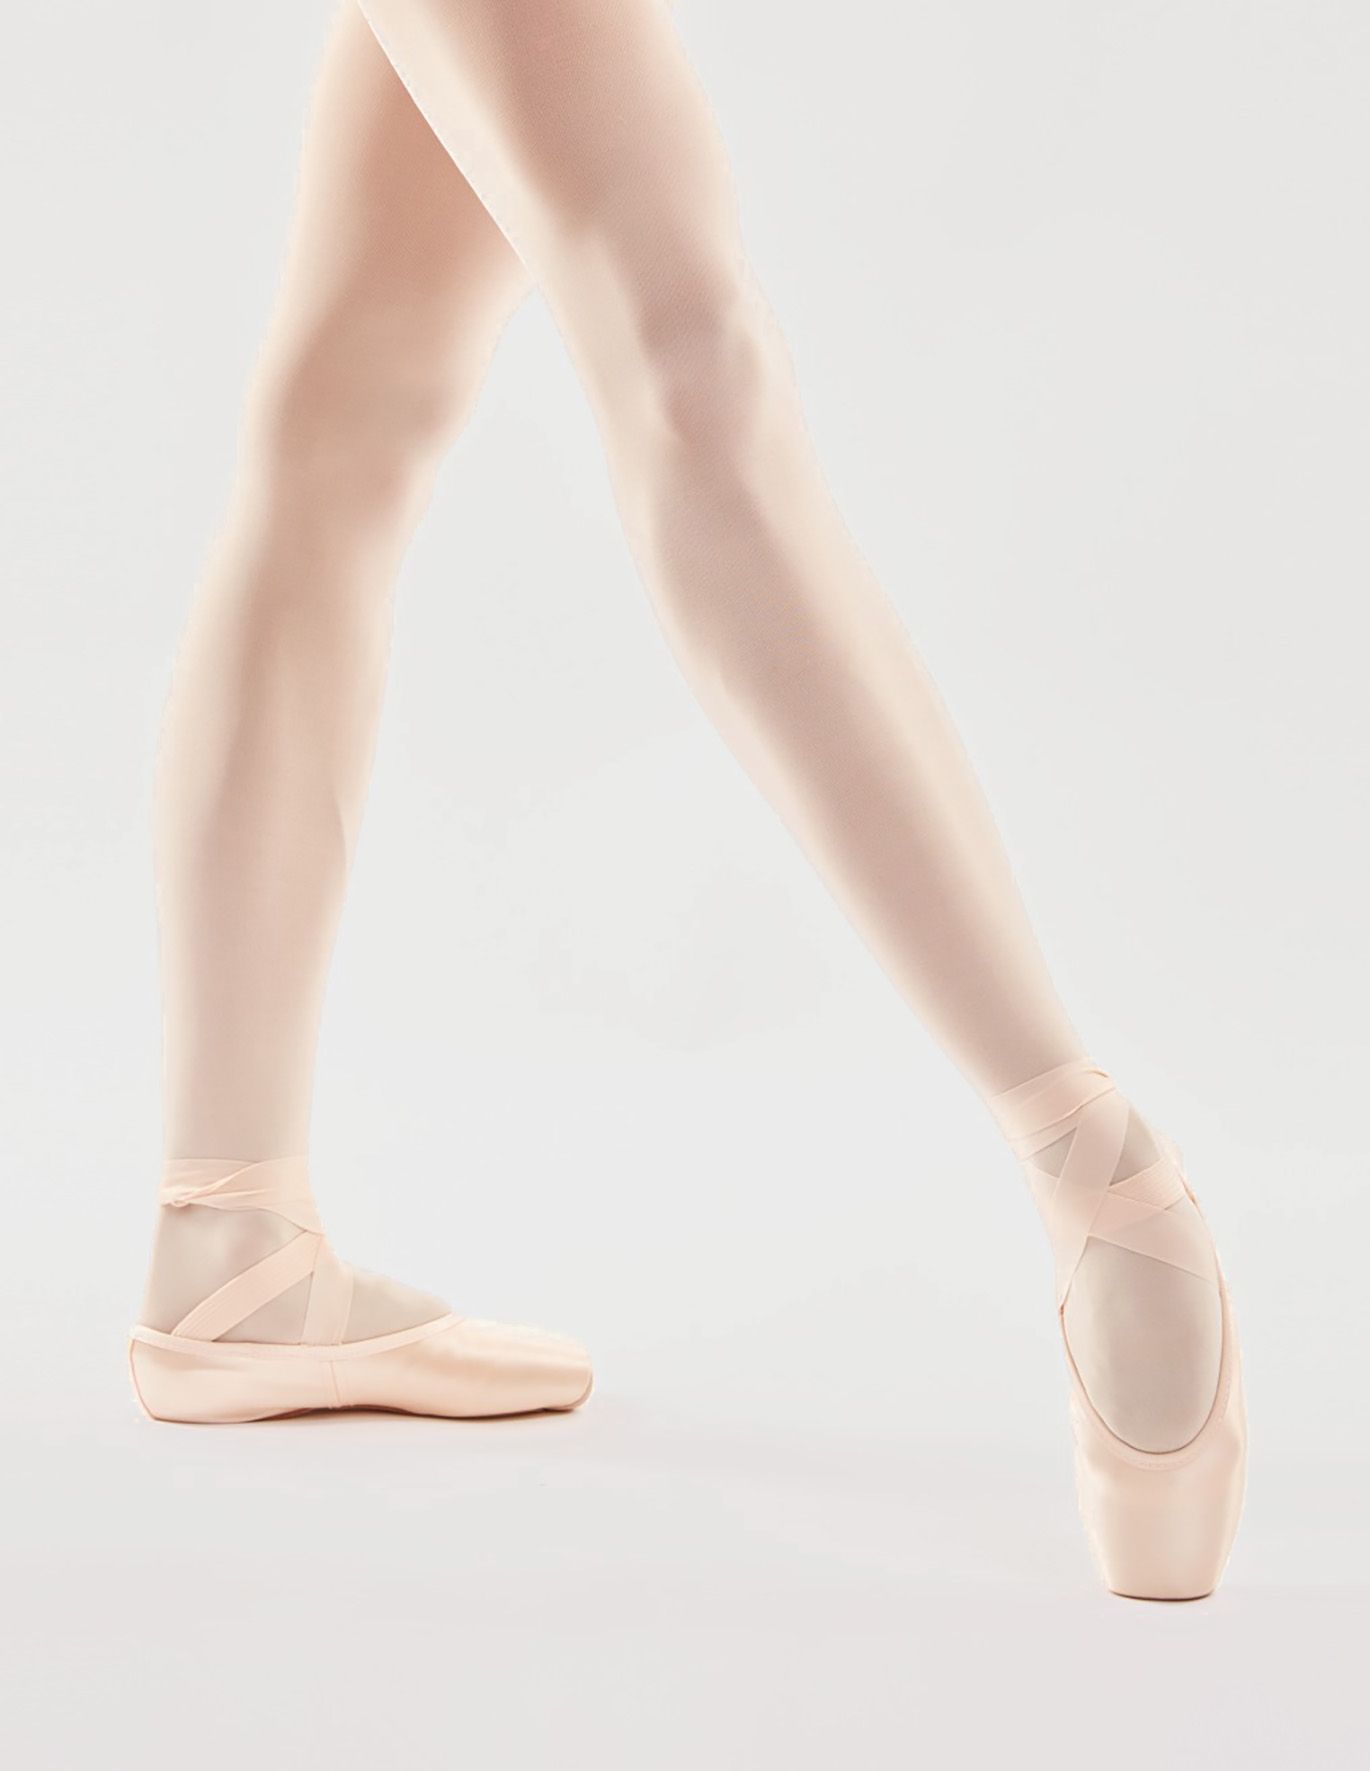  AGYE Ballet Pointe Shoes, Pink Professional Dance